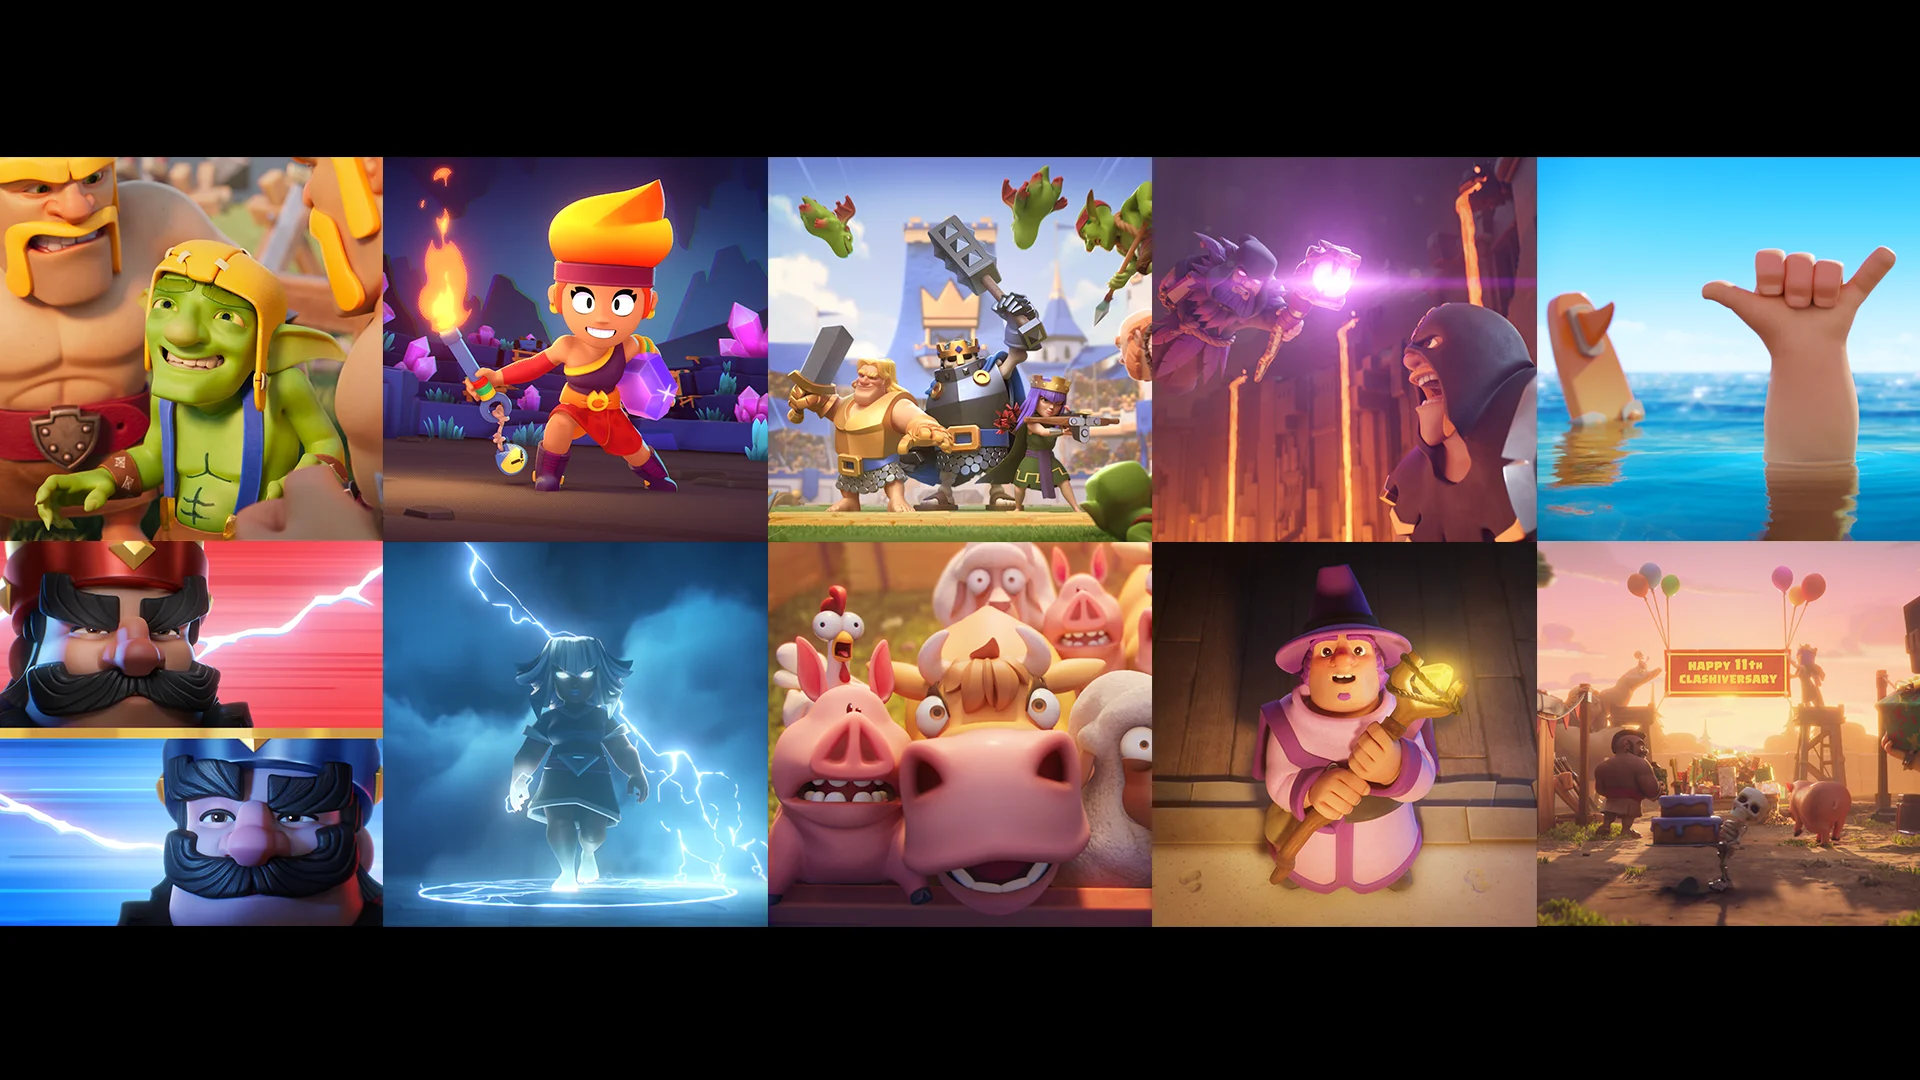 Clash of Clans developer Supercell reveals new game, Brawl Stars